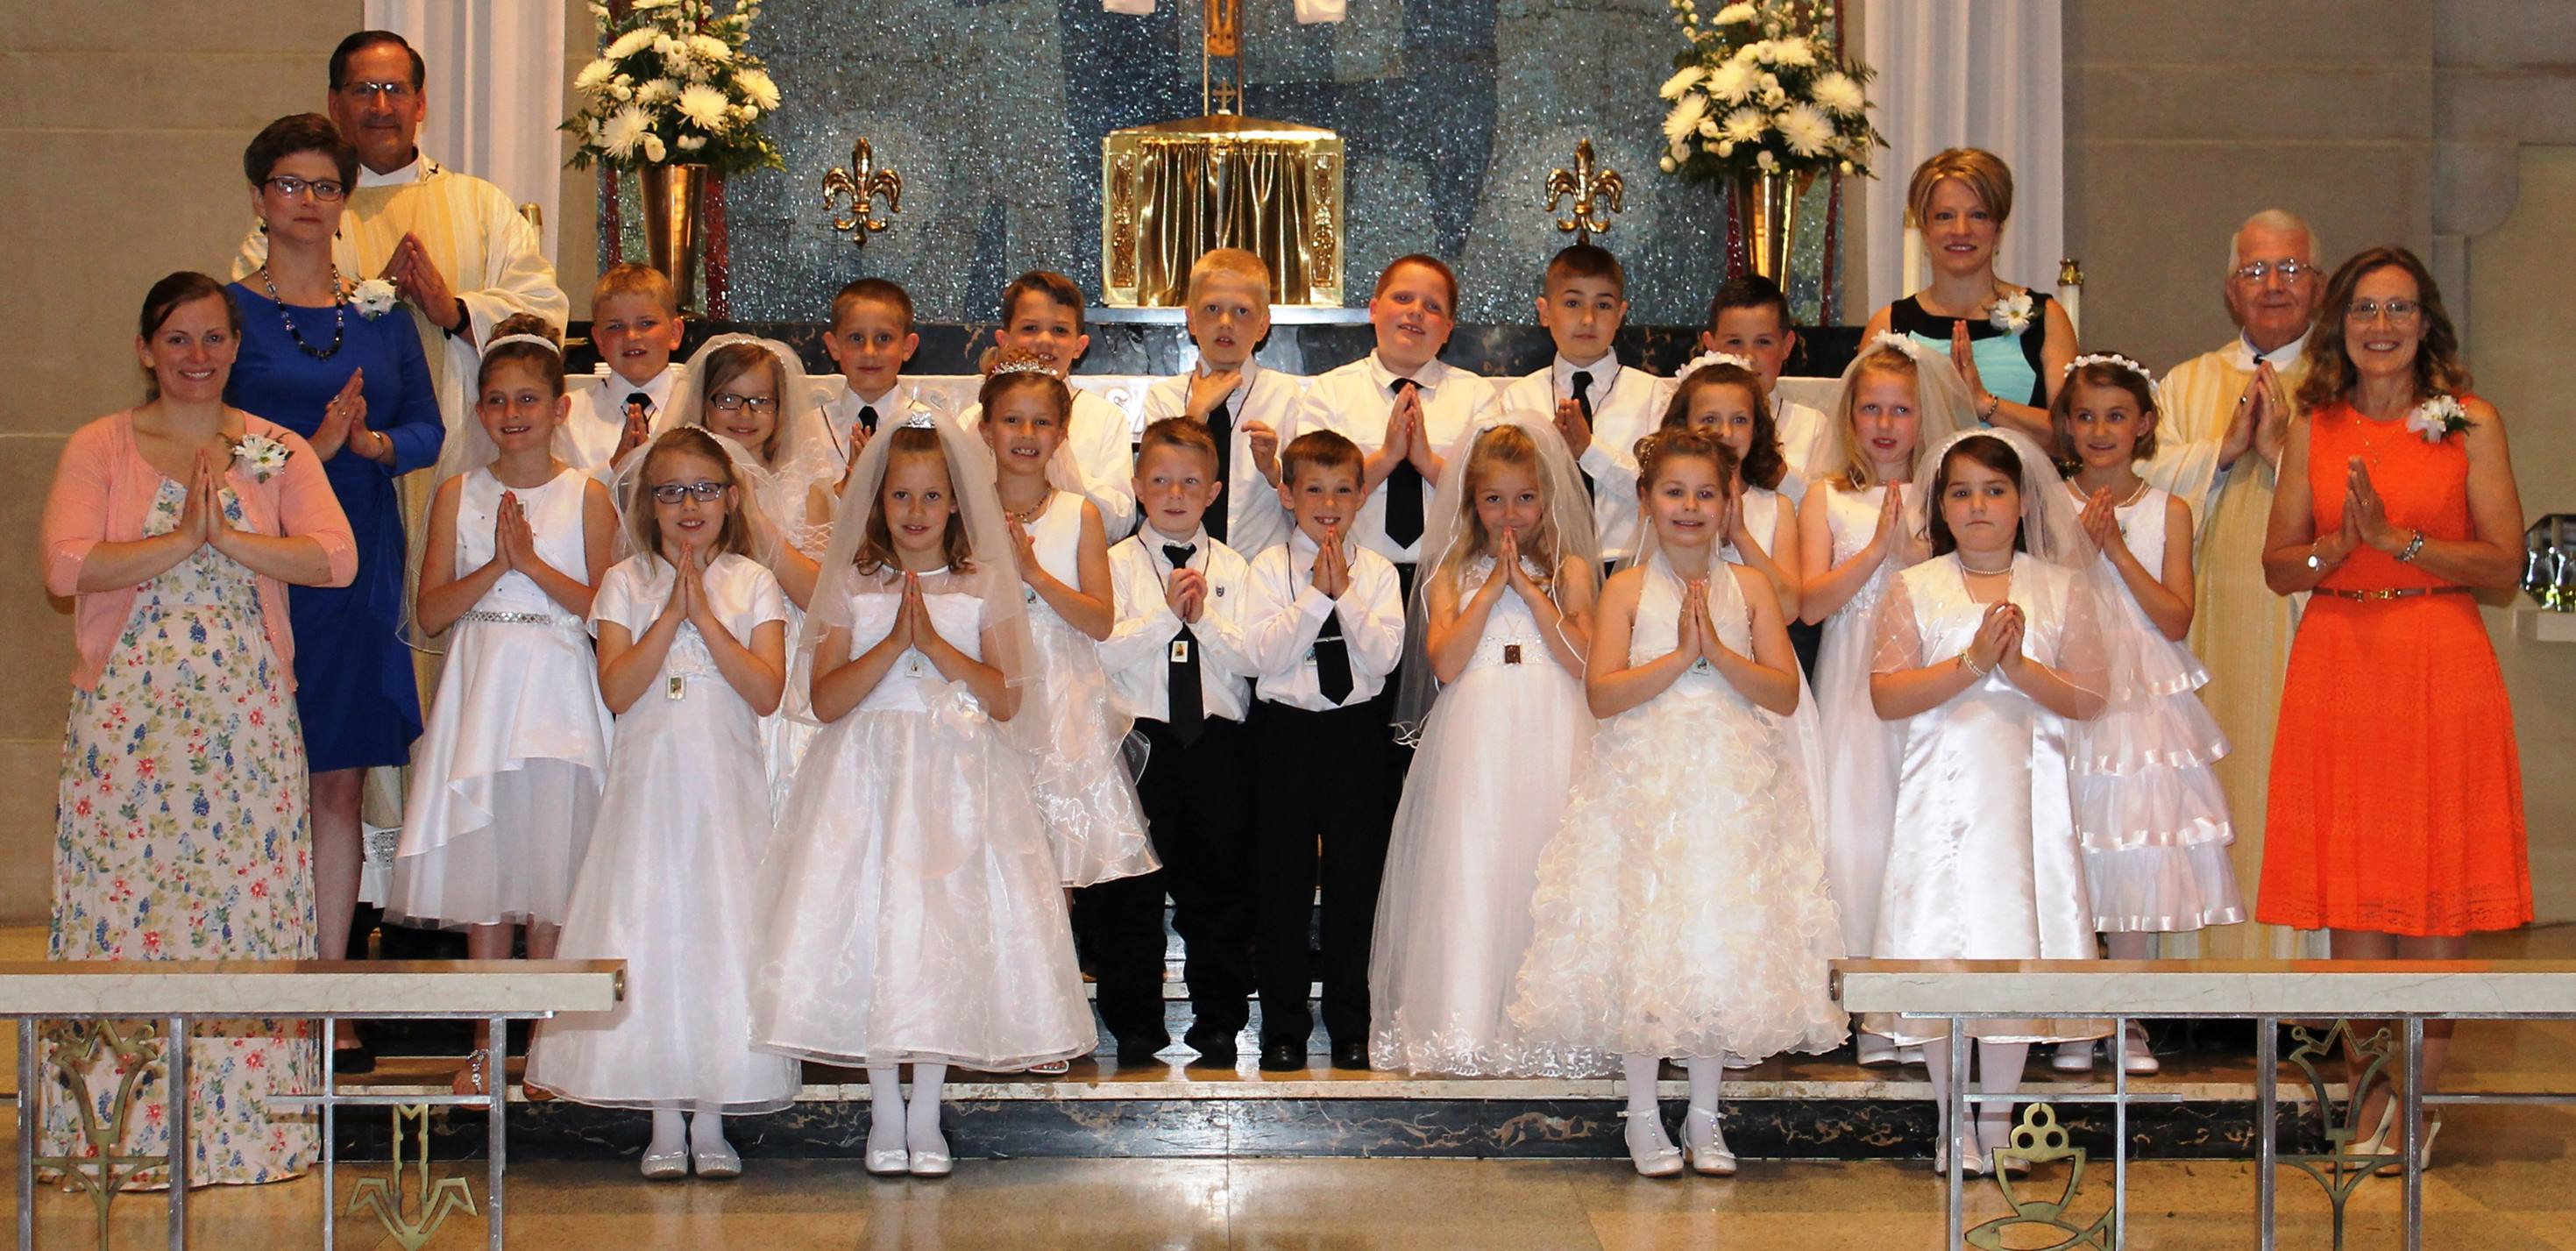 first communion images